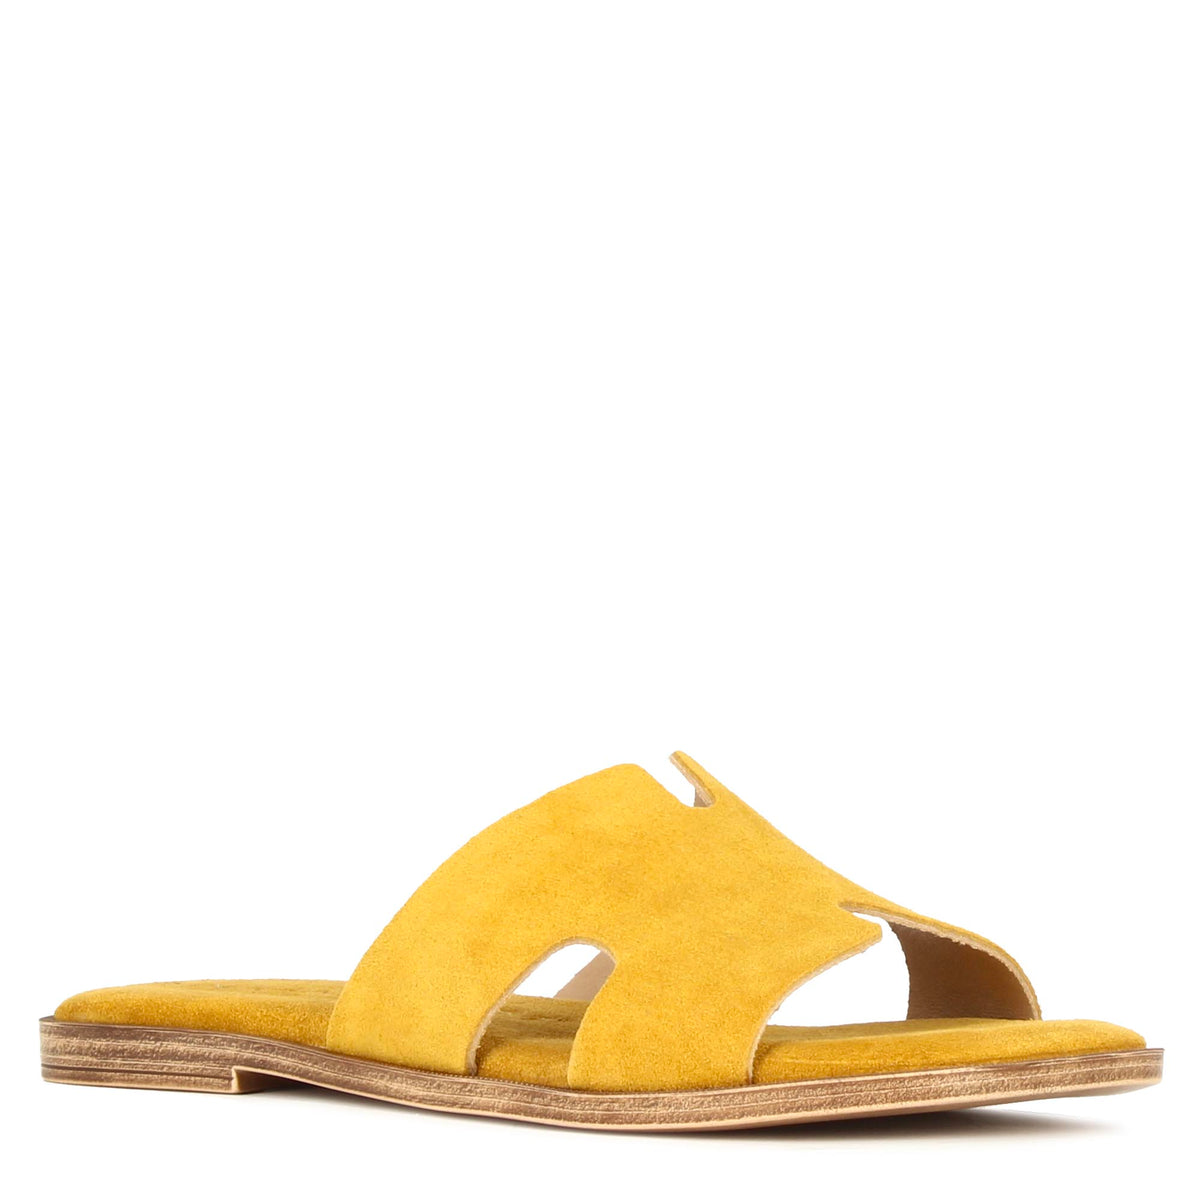 Women's yellow suede slippers